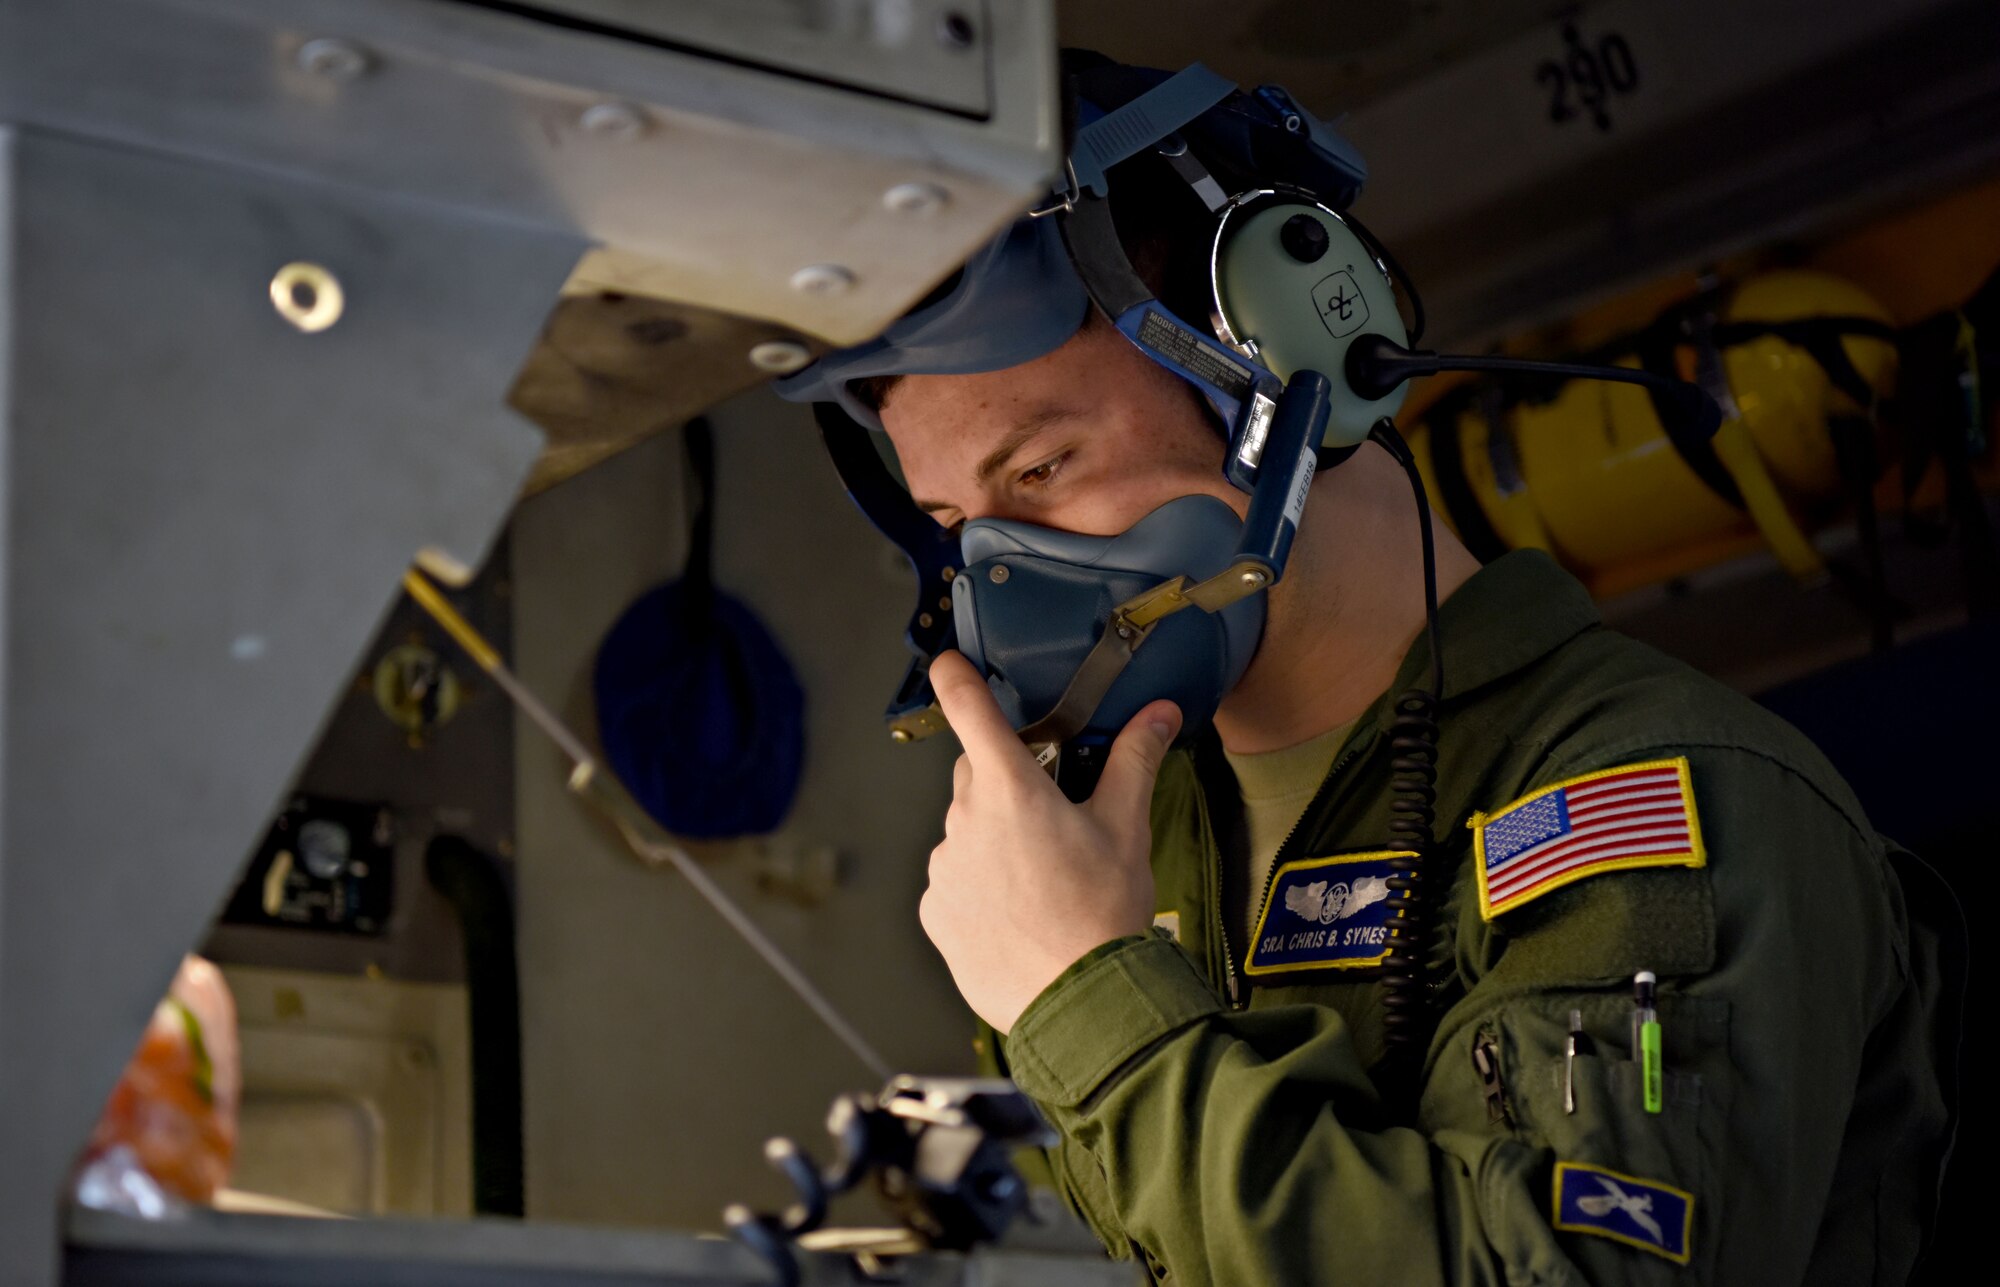 U.S. Air Force Senior Airman Chris Symes, 14th Airlift Squadron loadmaster, checks an oxygen mask before takeoff at Joint Base Charleston, S.C. Jan. 30, 2018.